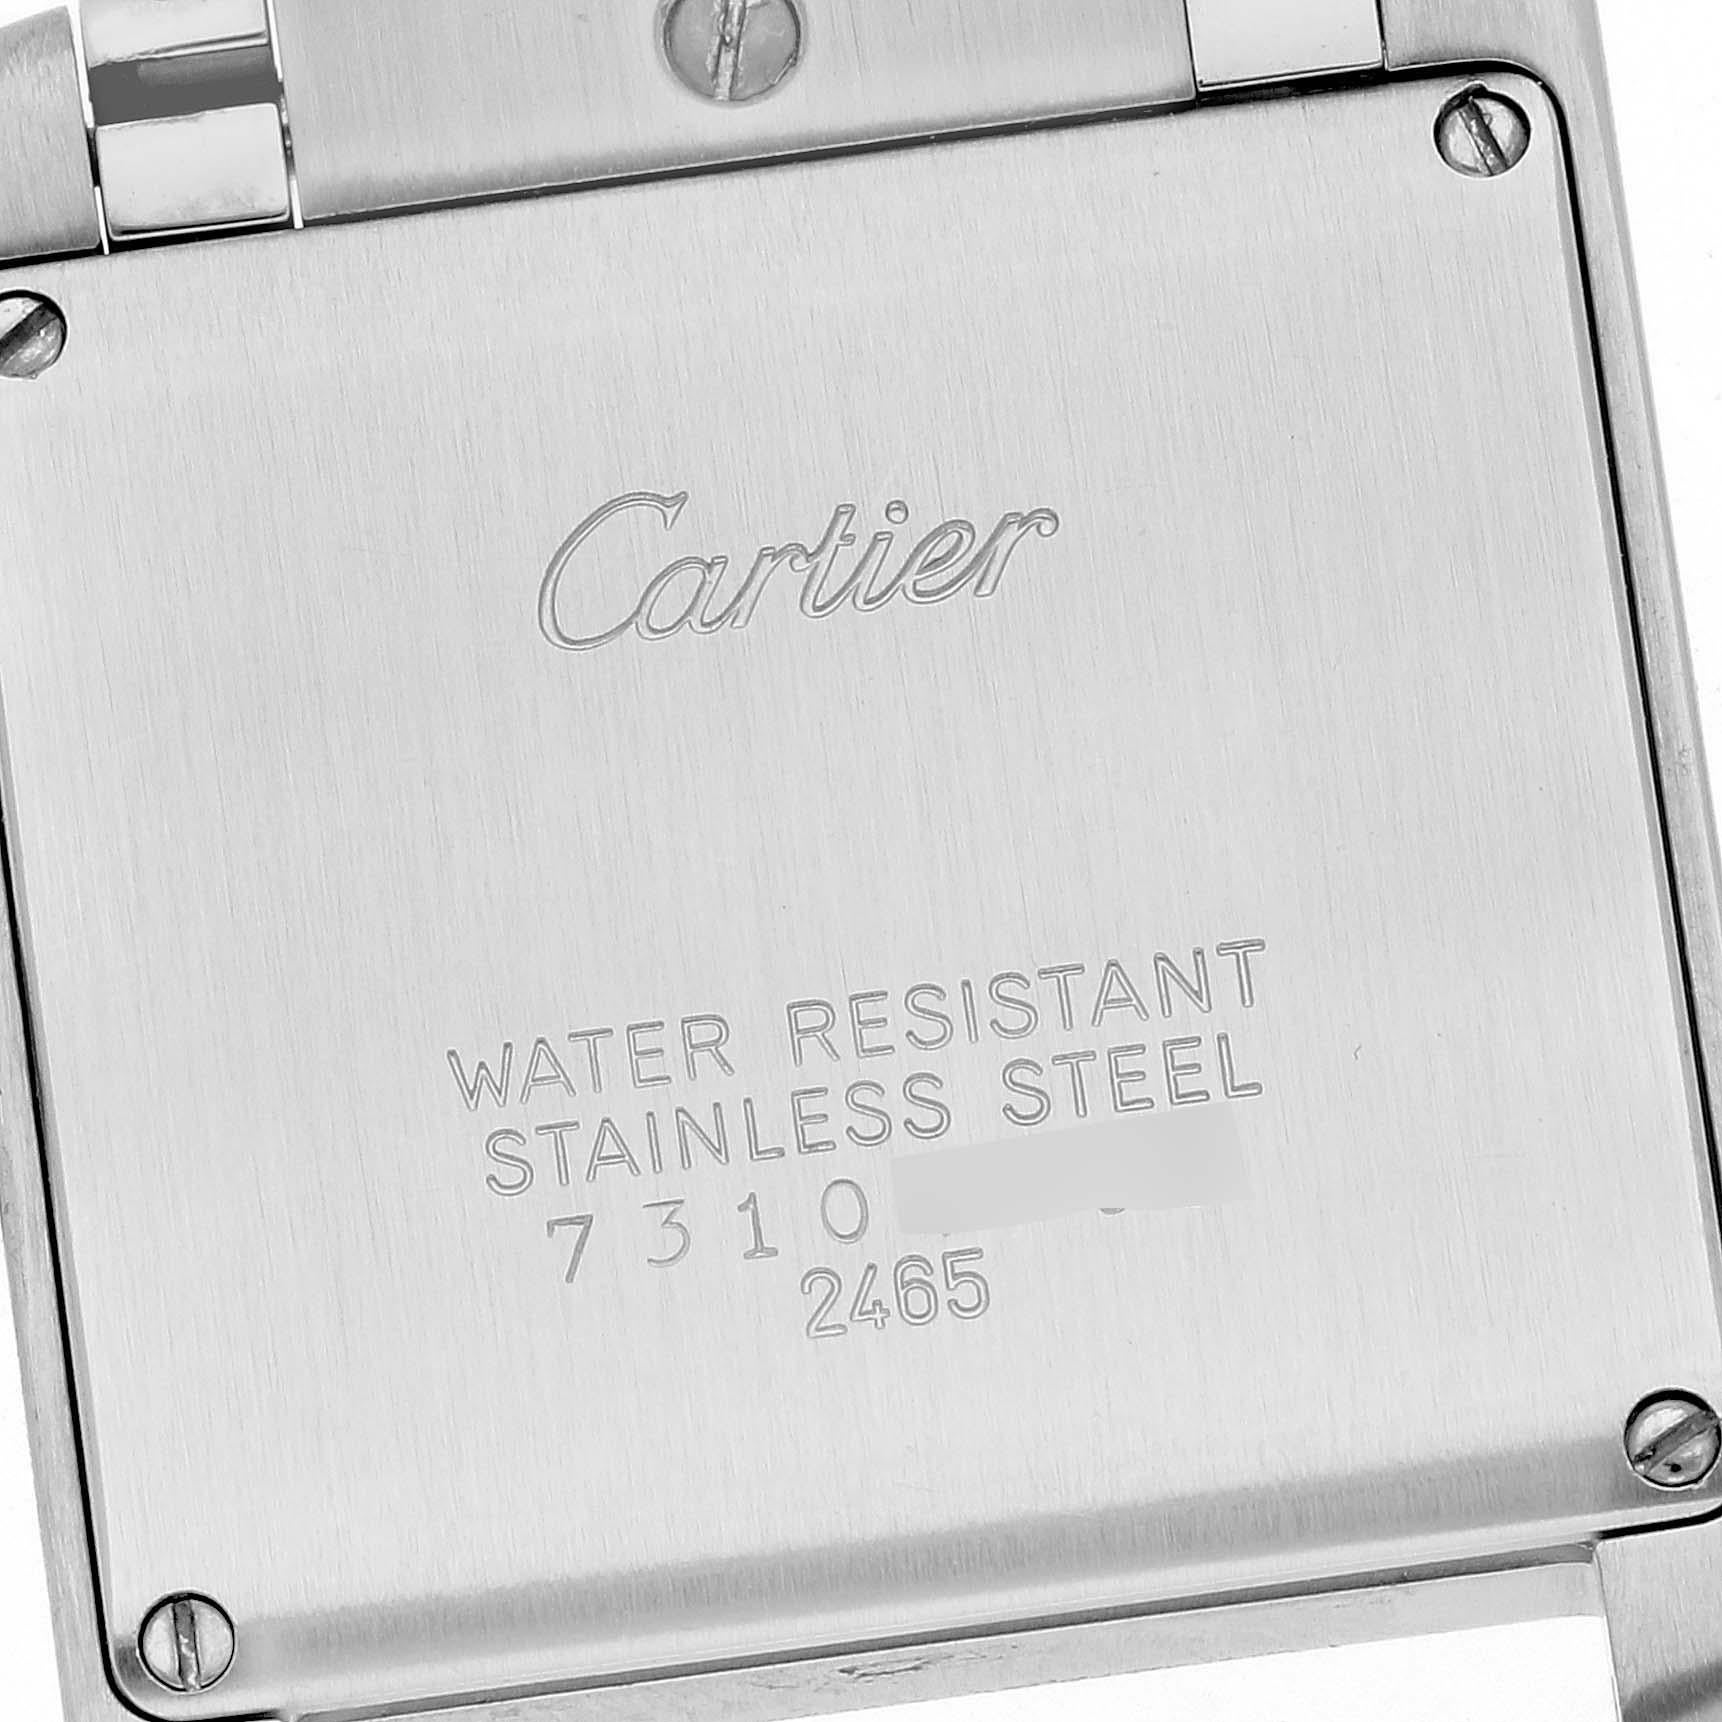 Cartier Tank Francaise Midsize Steel Ladies Watch W51011Q3 Box Papers. Quartz movement. Rectangular stainless steel 25.0 X 30.0 mm case. Octagonal crown set with a blue spinel cabochon. . Scratch resistant sapphire crystal. Silvered dial with black